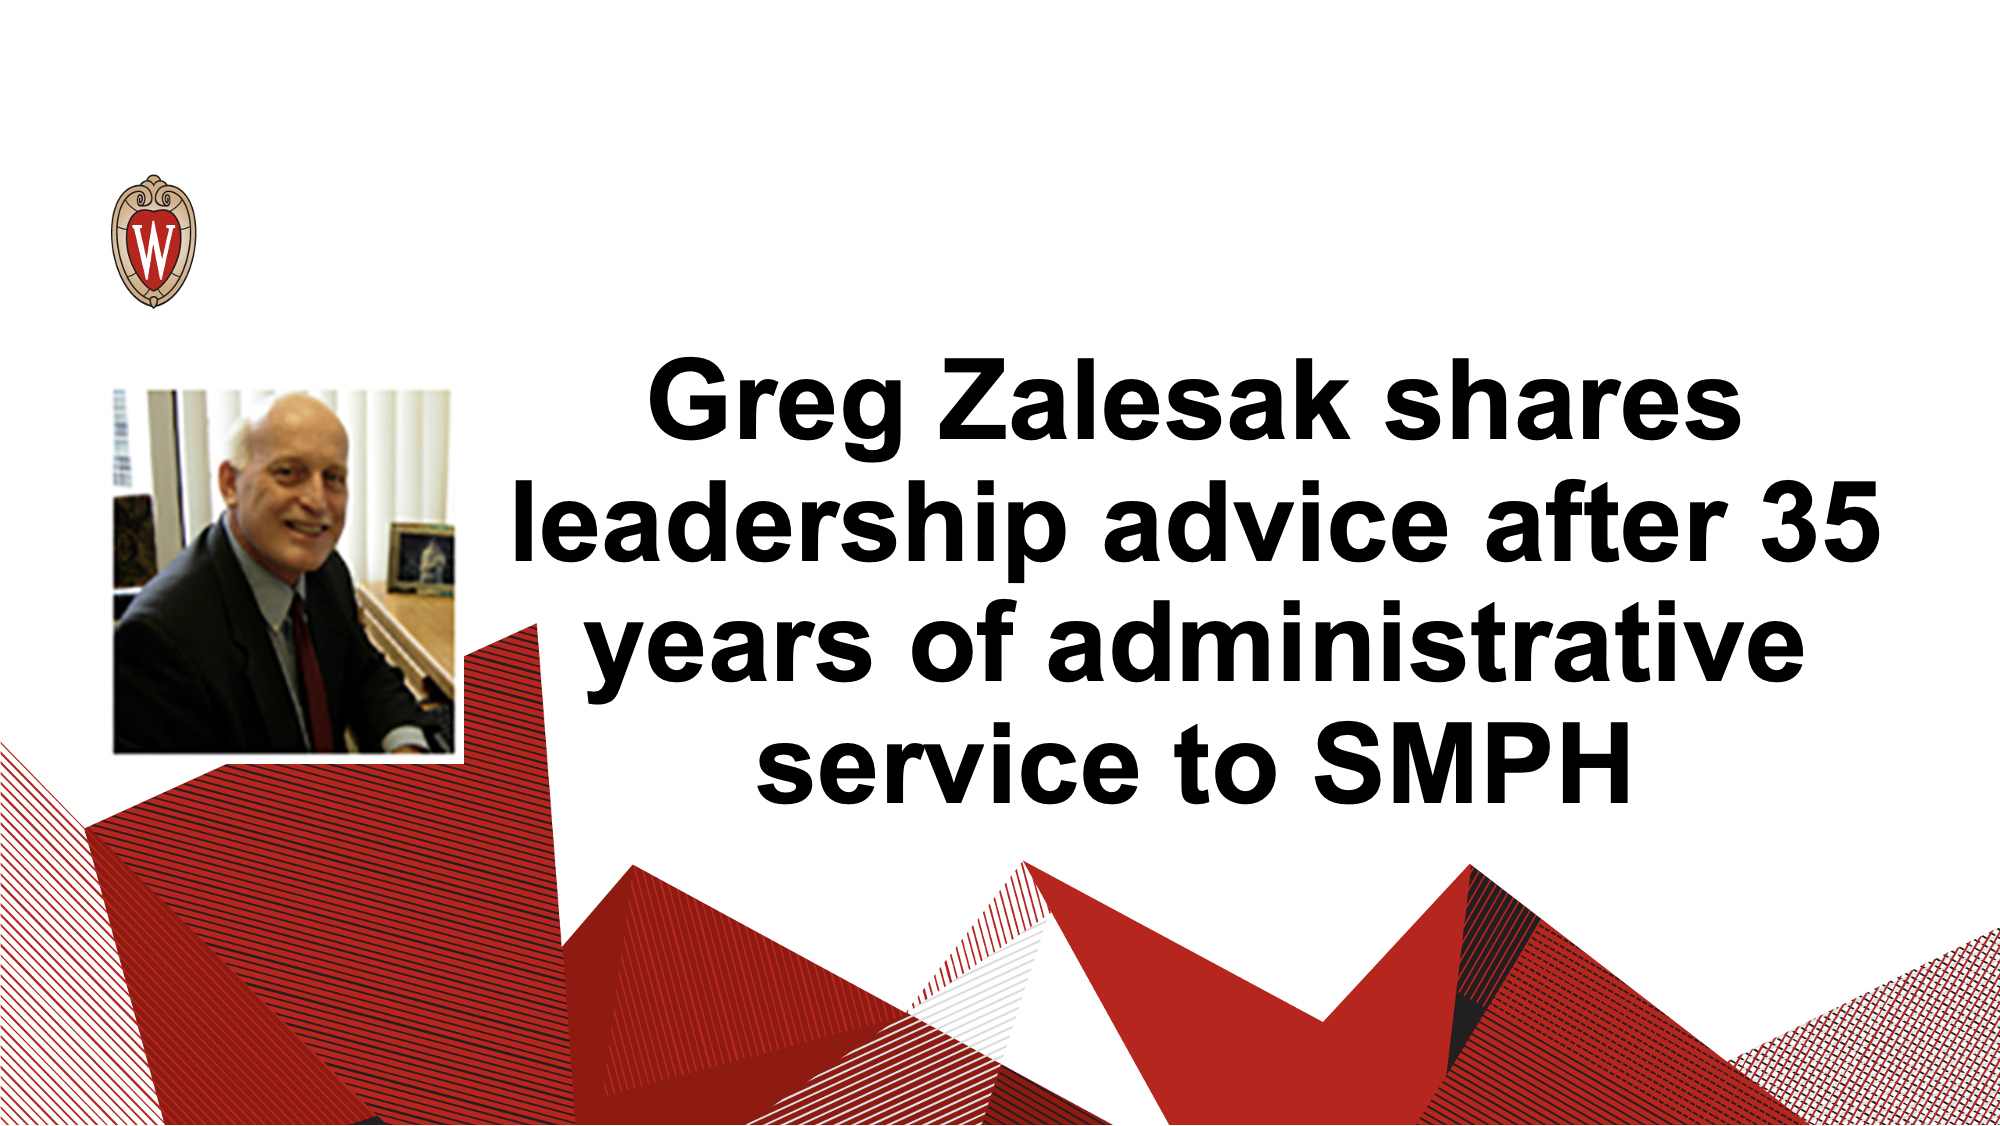 Greg Zalesak shares leadership advice after 35 years of administrative service to SMPH